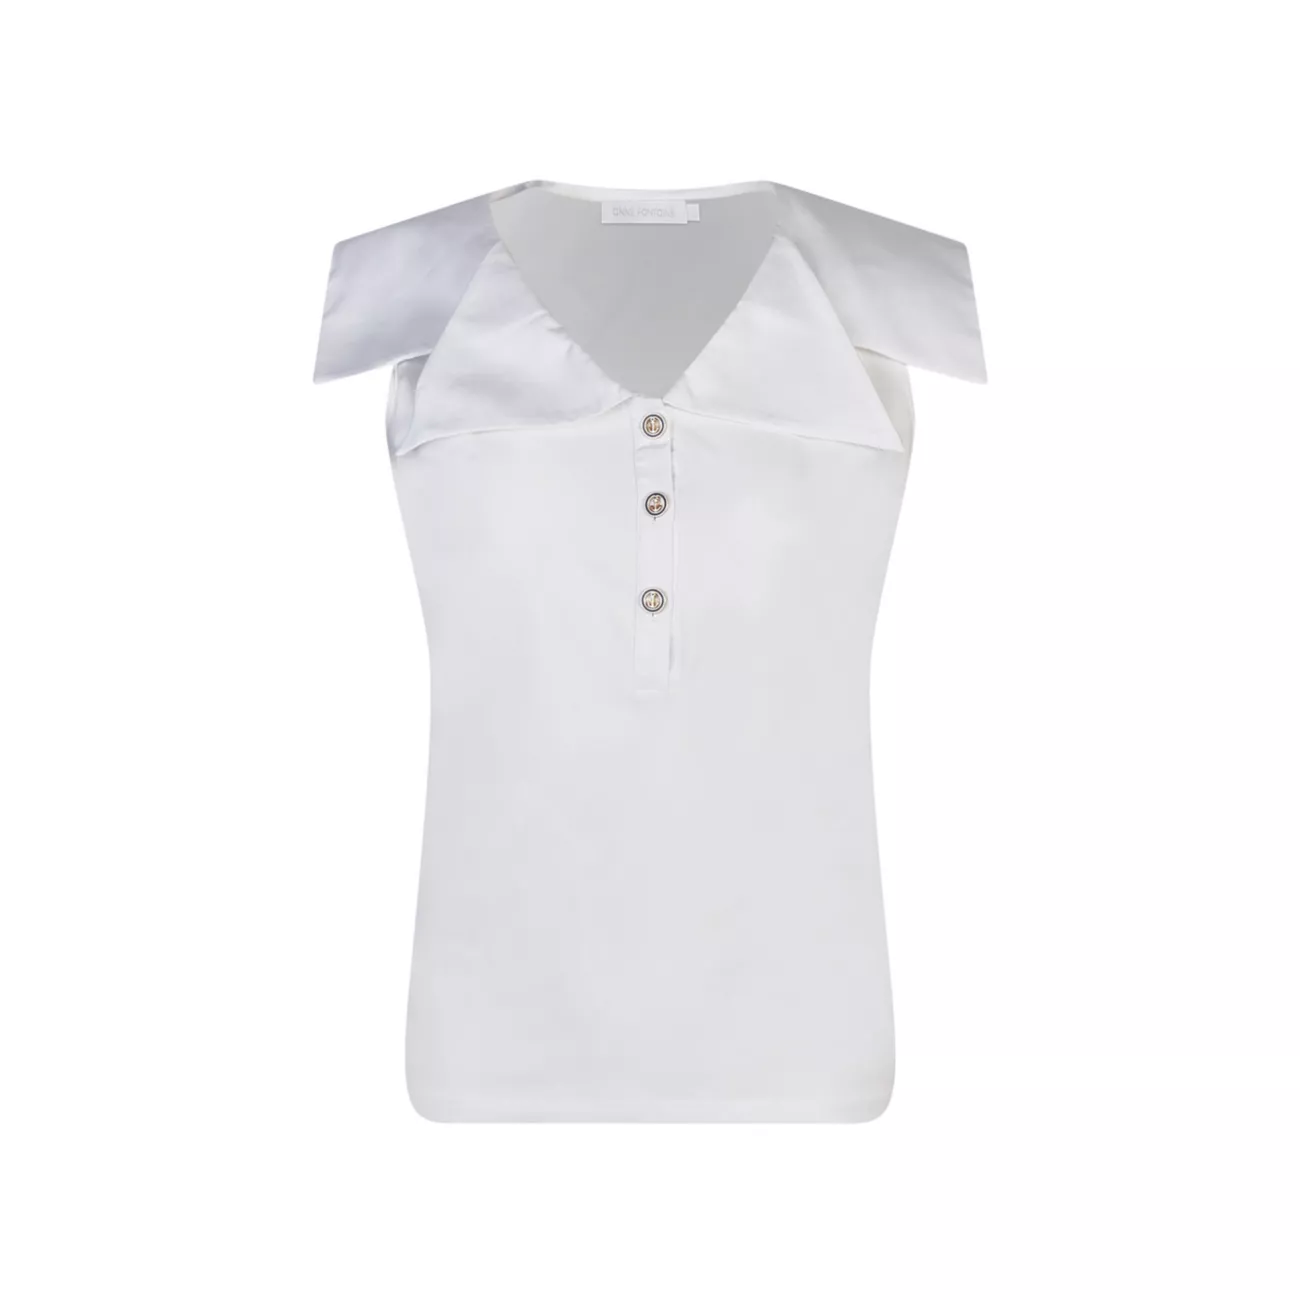 Alizee Double Collar Shirt Anne Fontaine